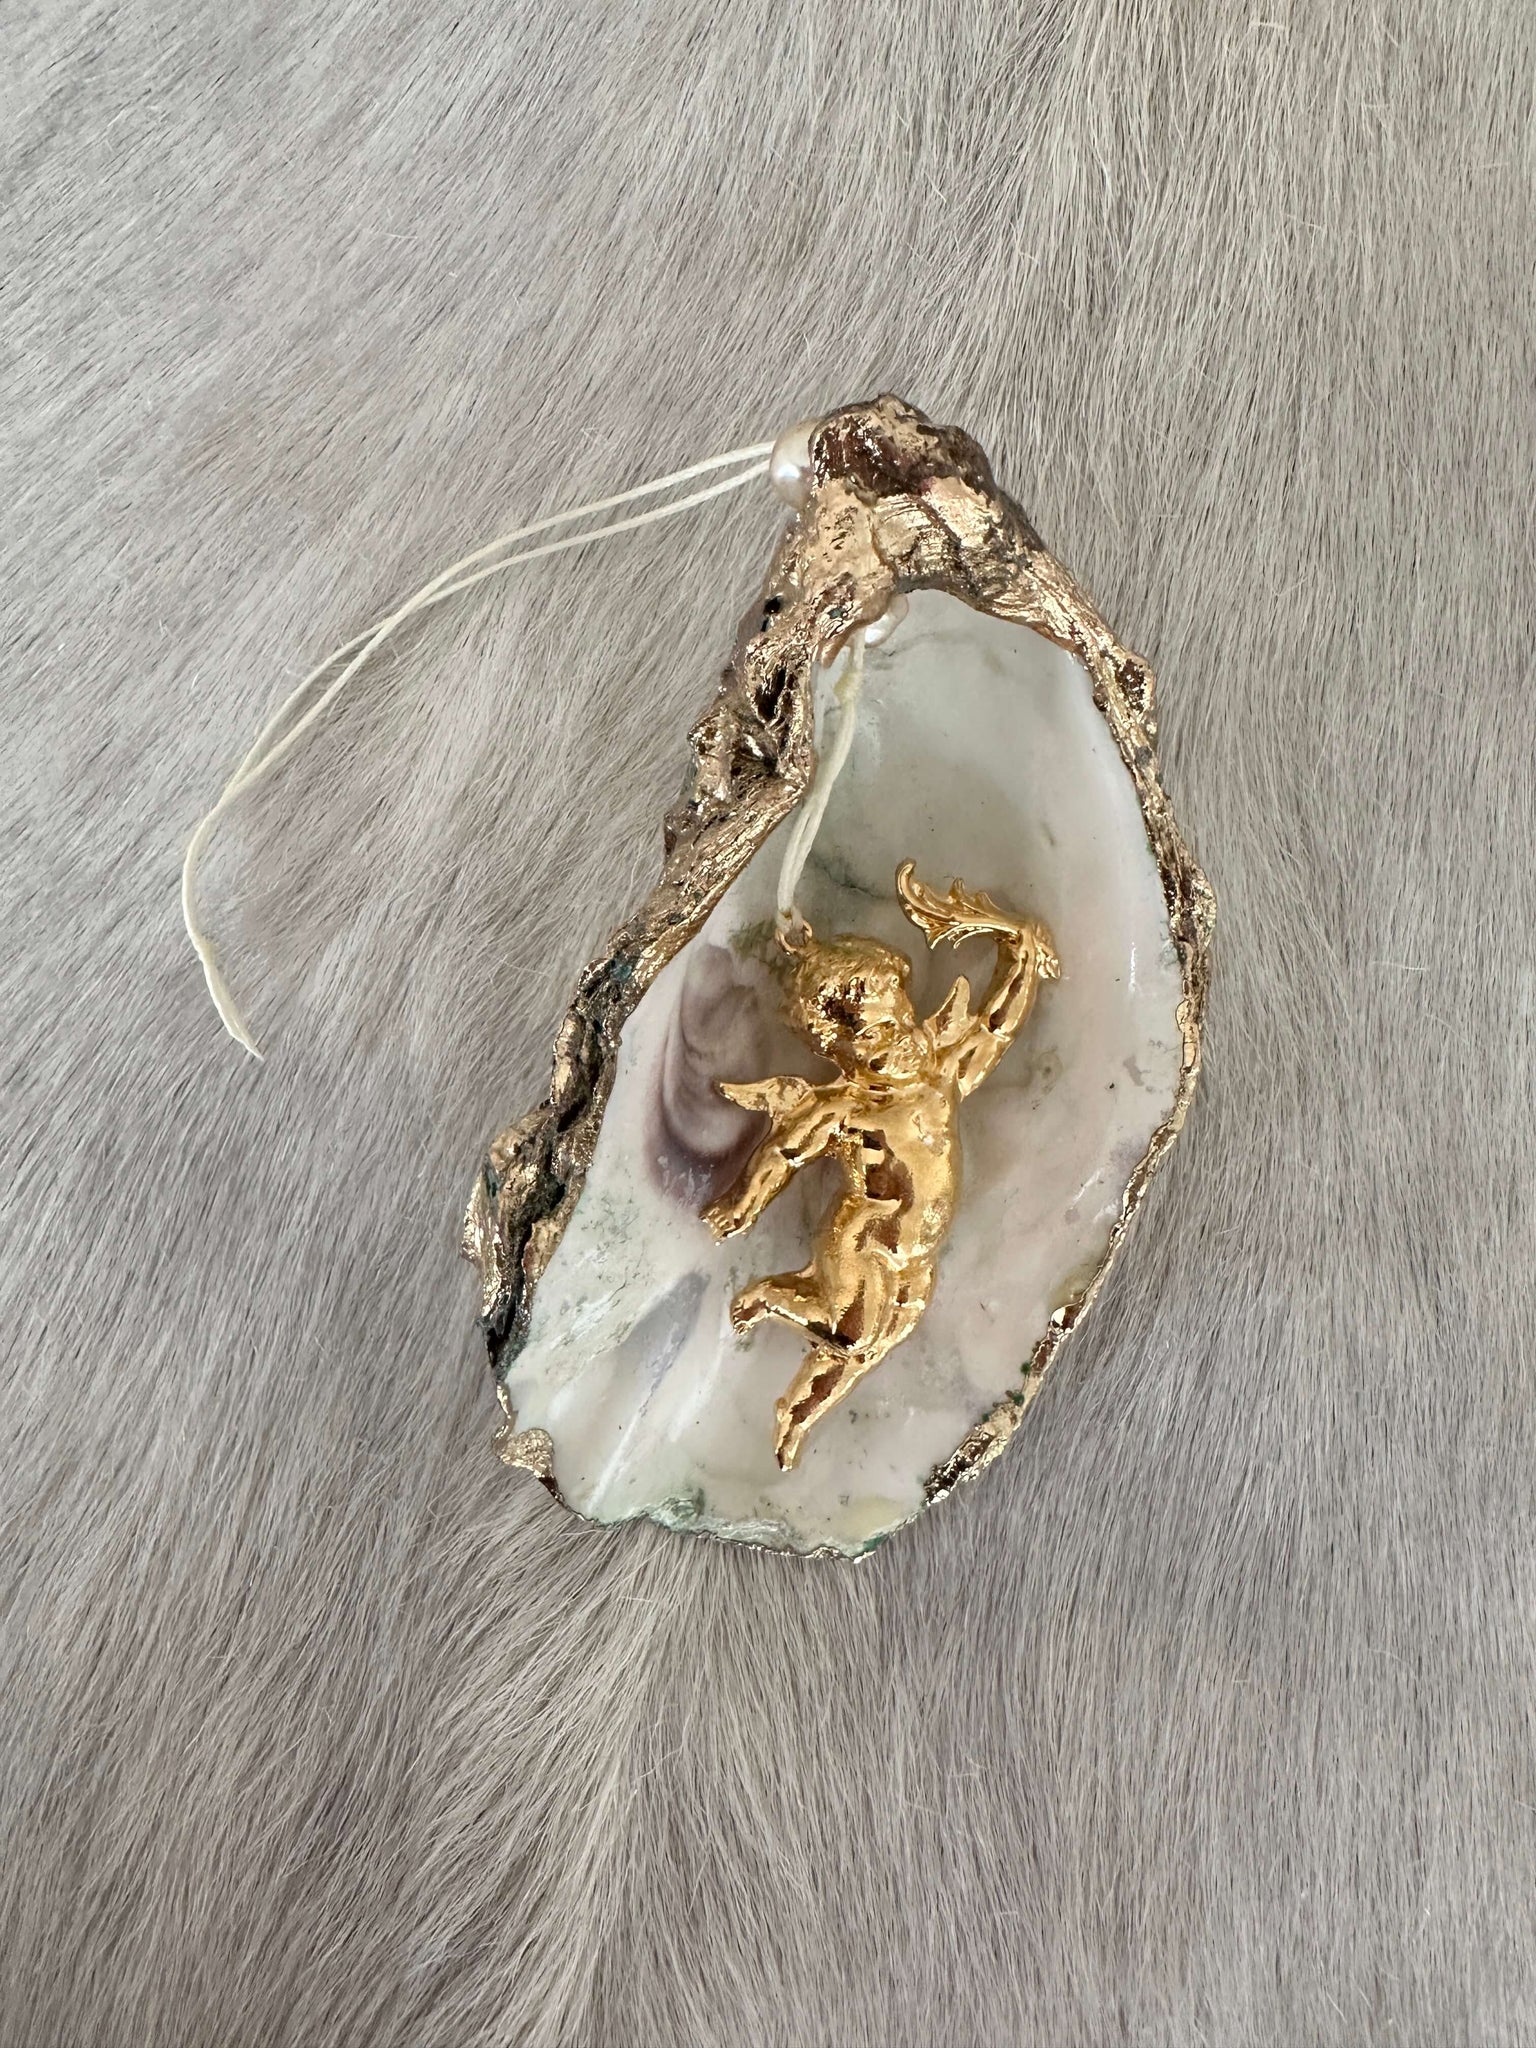 Oyster shell with pendant: shiny putti, left 